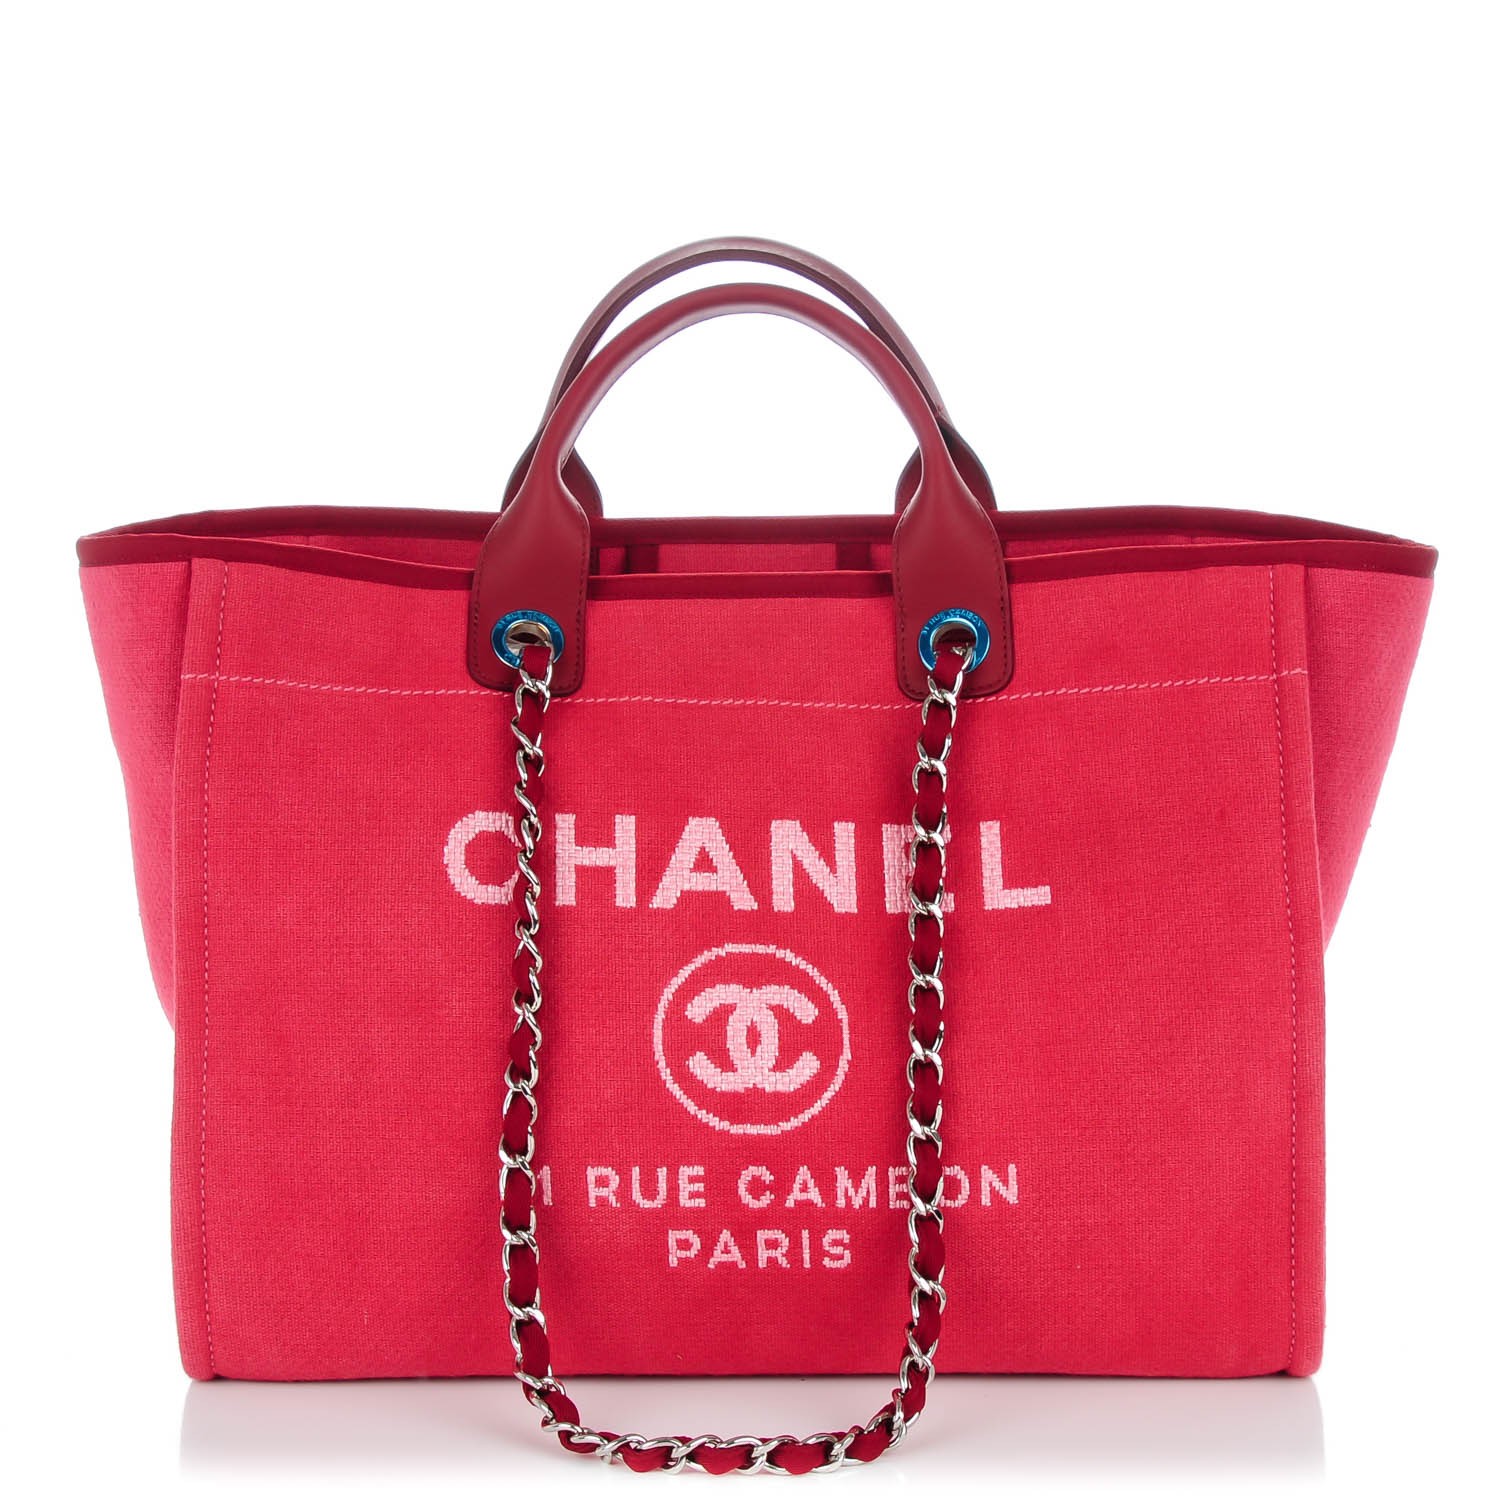 CHANEL Canvas Large Deauville Tote Red 140370